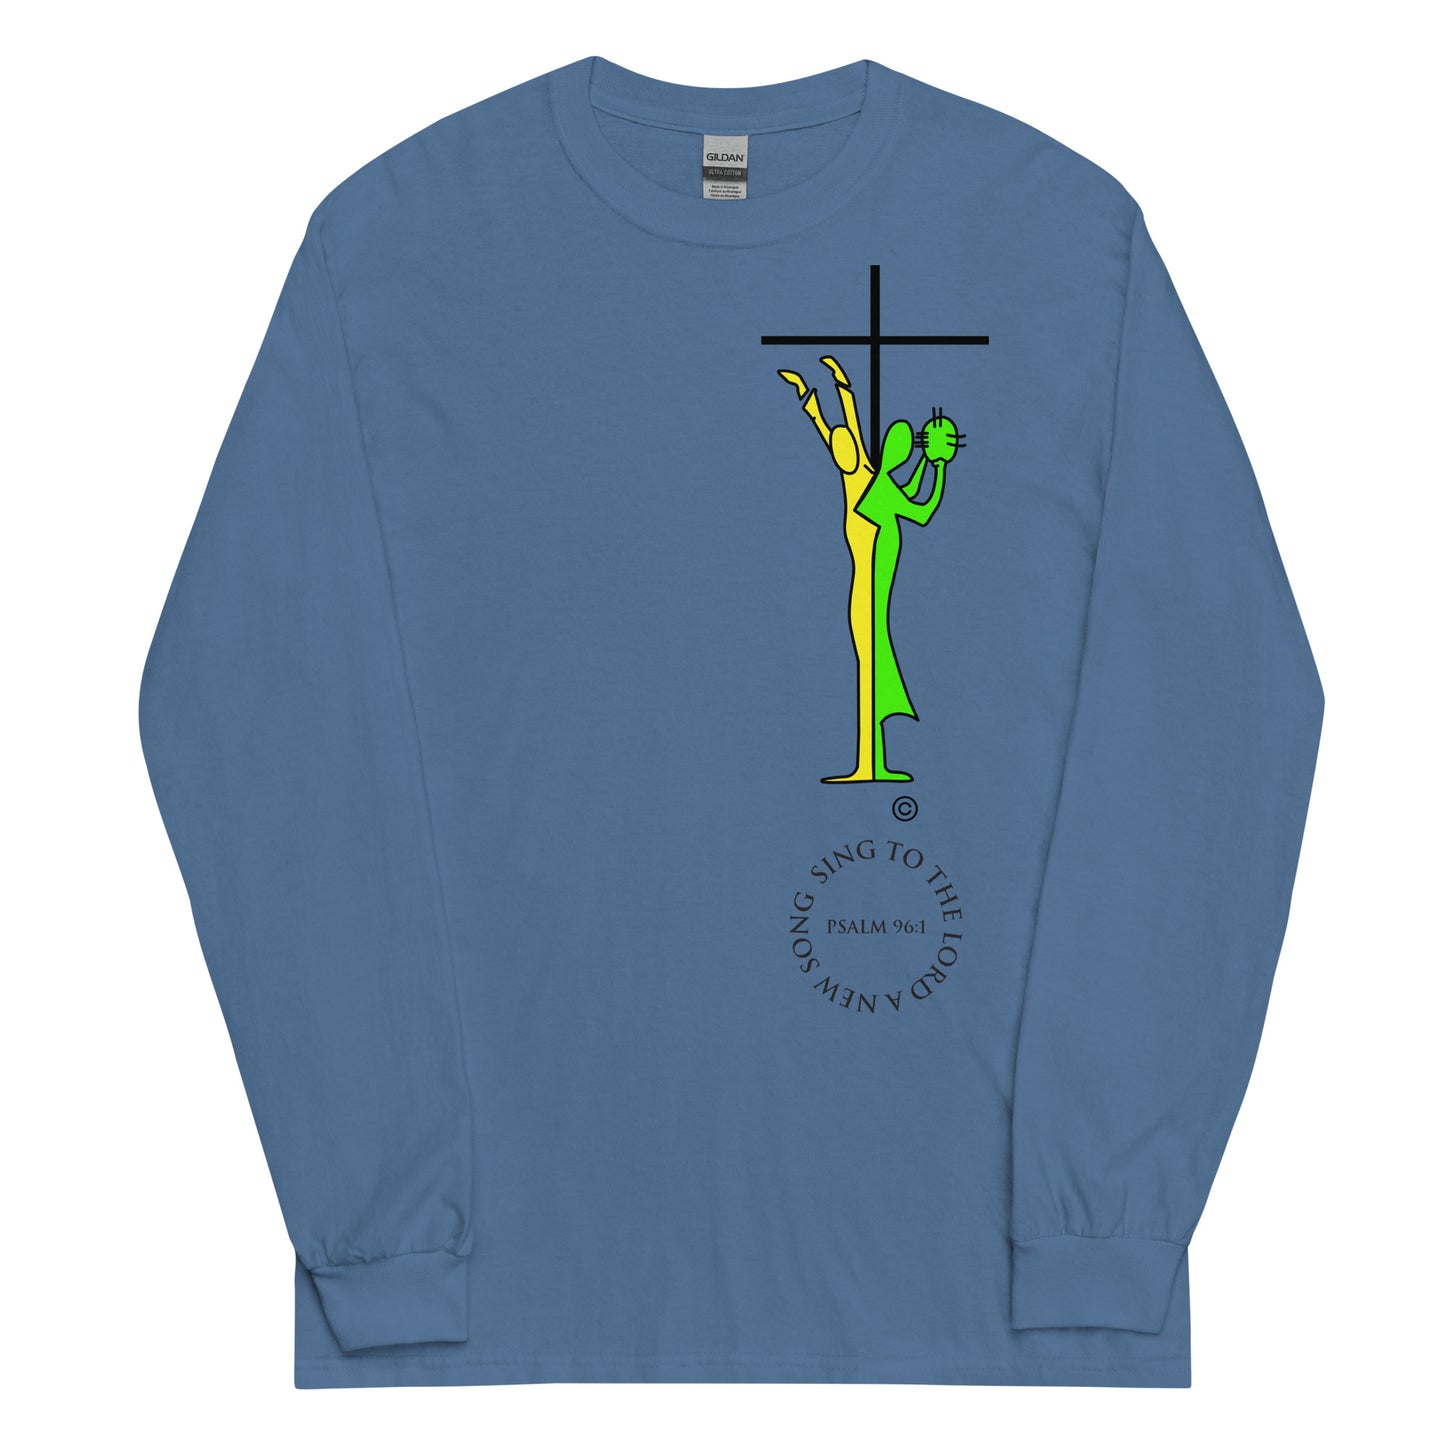 Sing to the Lord Men’s Long Sleeve Shirt